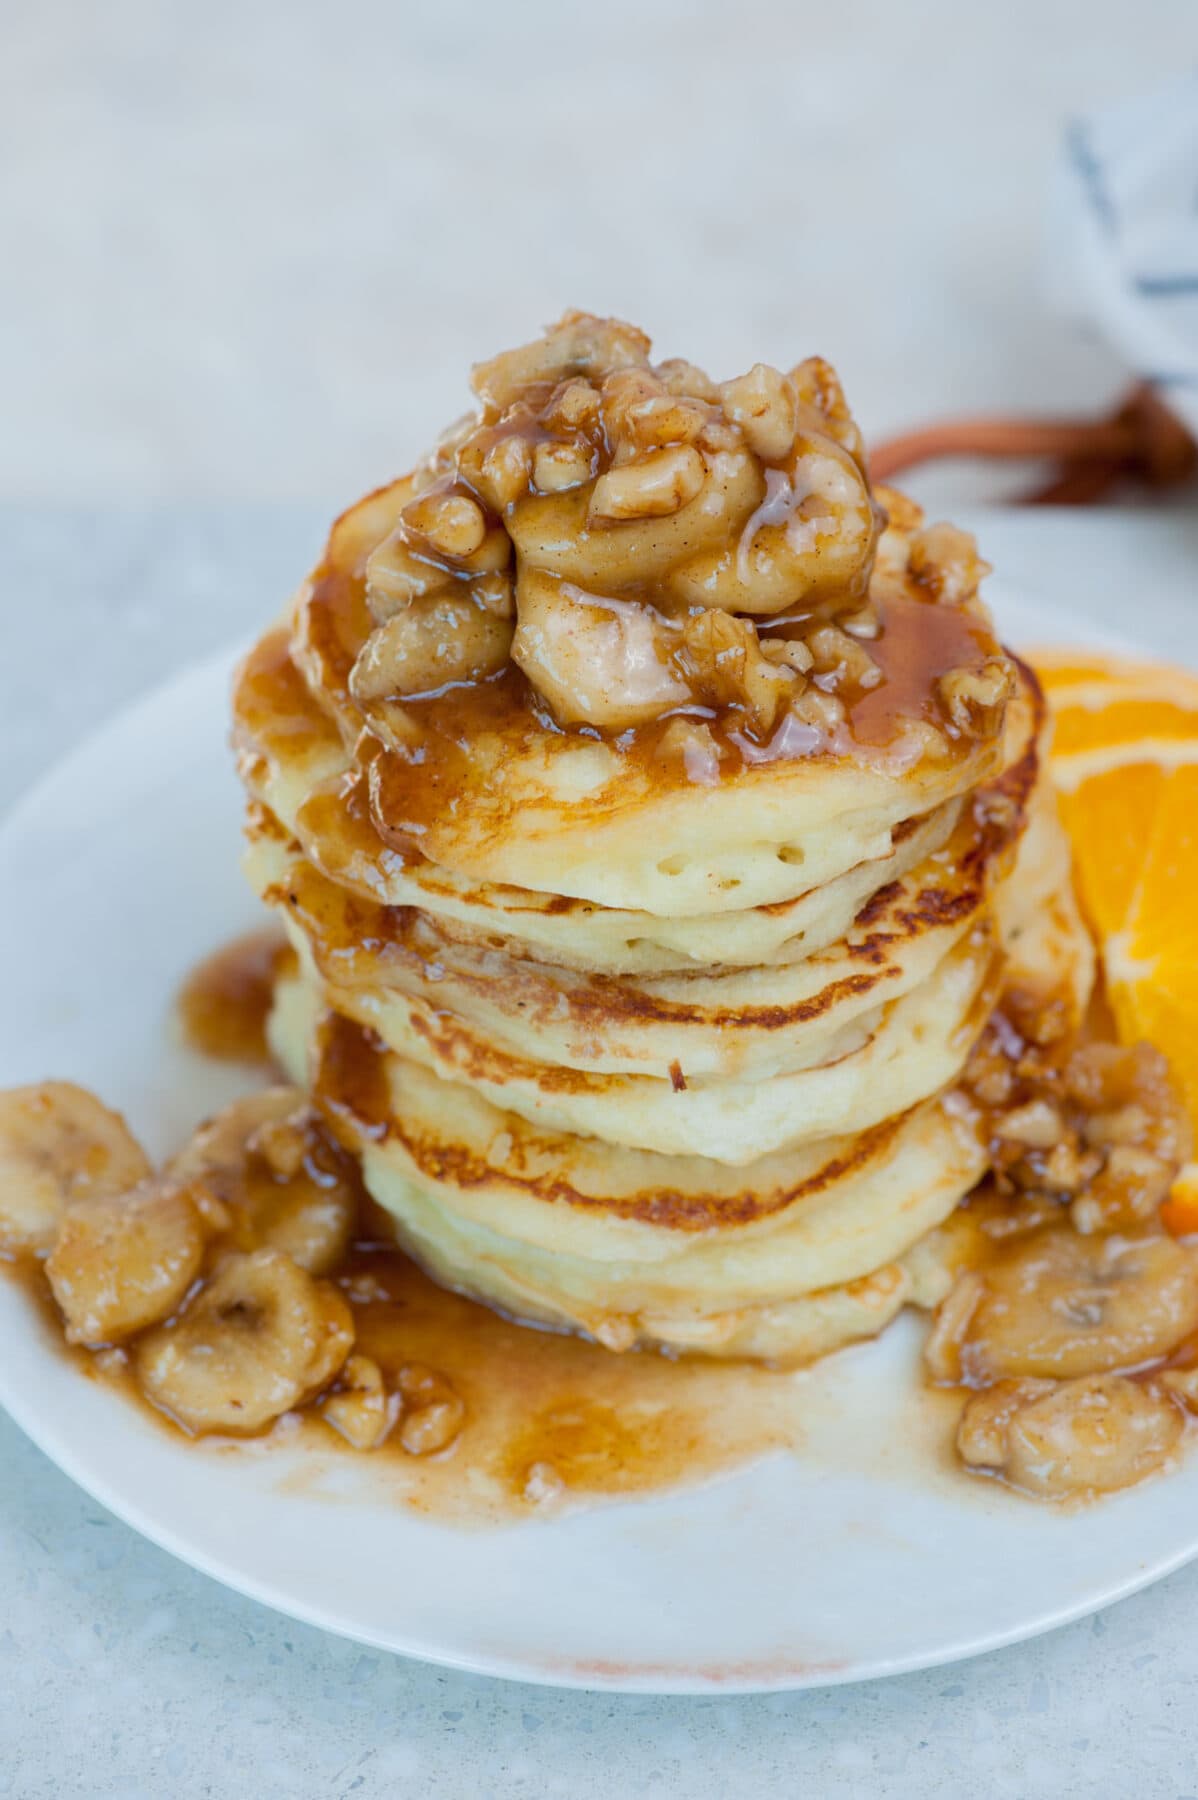 A stack of banana foster pancakes on a white plate.